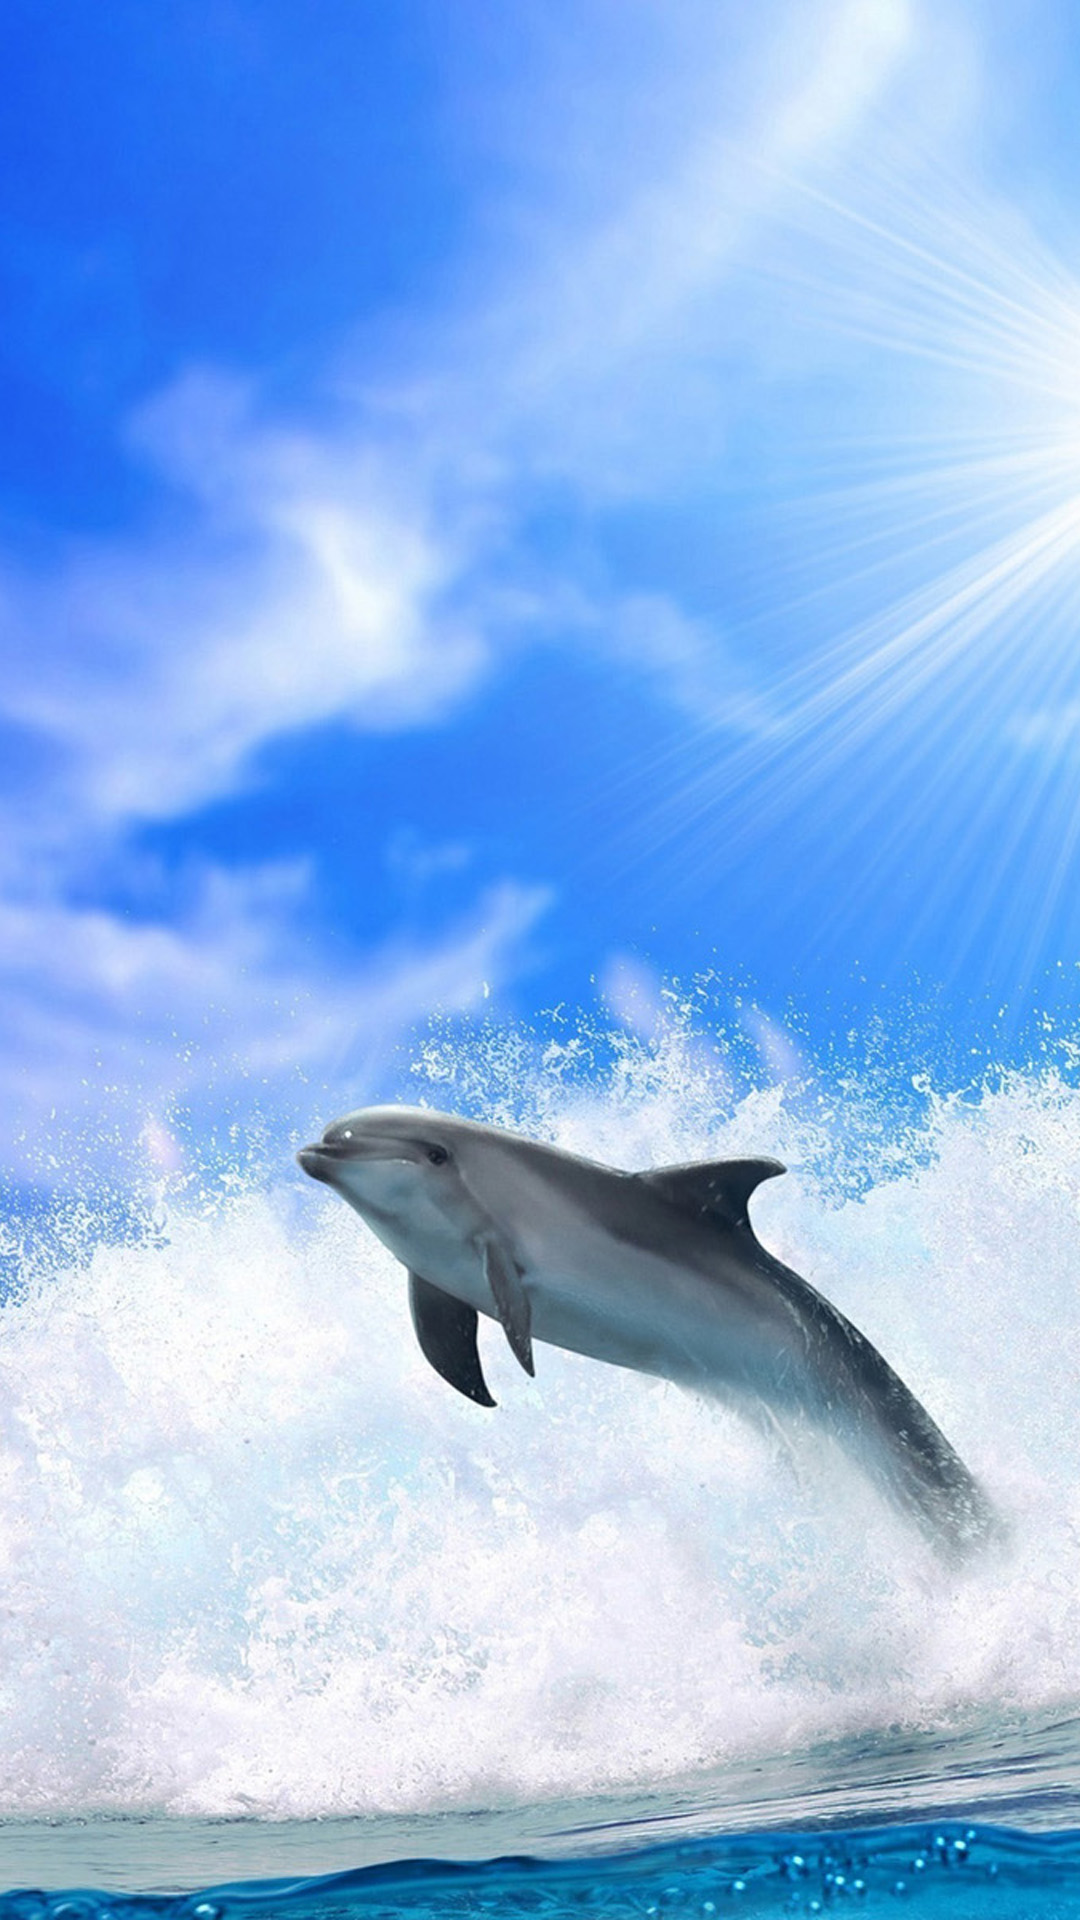 Free Download Dolphin Iphone Wallpaper Ocean Dolphins Iphone 6 Plus 1080x19 For Your Desktop Mobile Tablet Explore 39 Dolphin Iphone Wallpaper Best Iphone Wallpapers Iphone 4s Wallpaper Wallpaper 6s Iphone